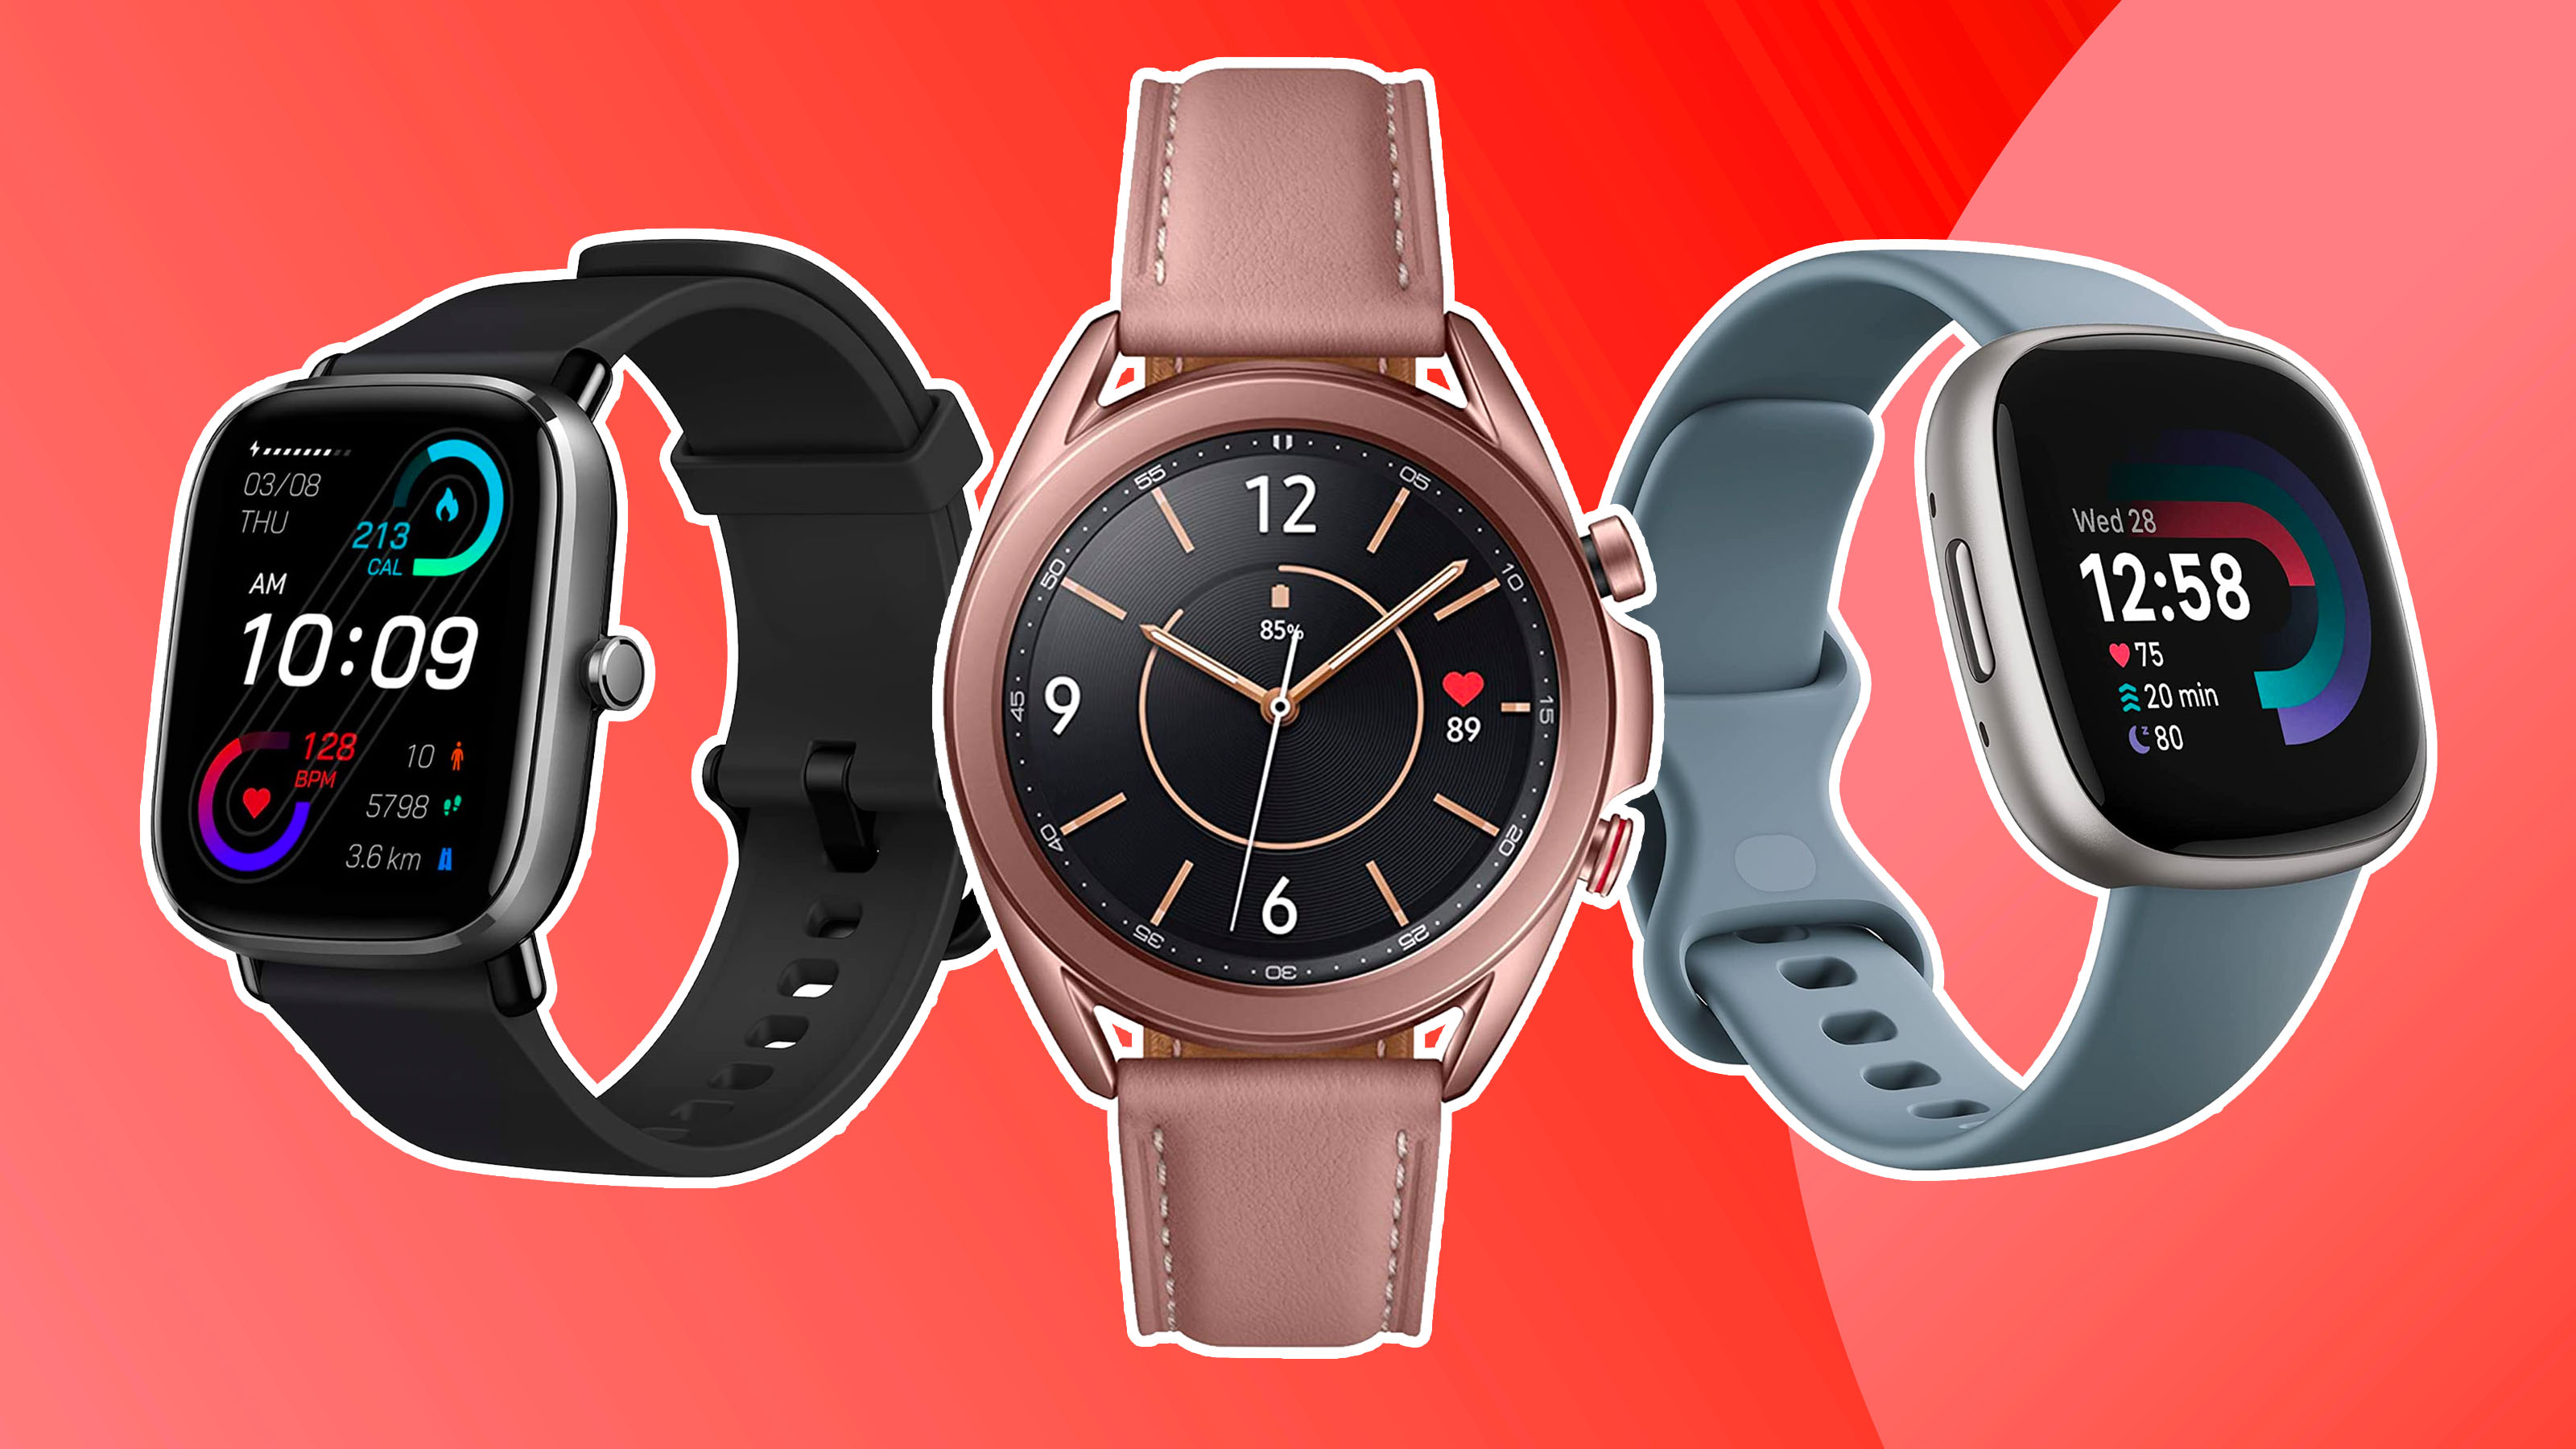 What Smartwatches Compatible With Google Fit?